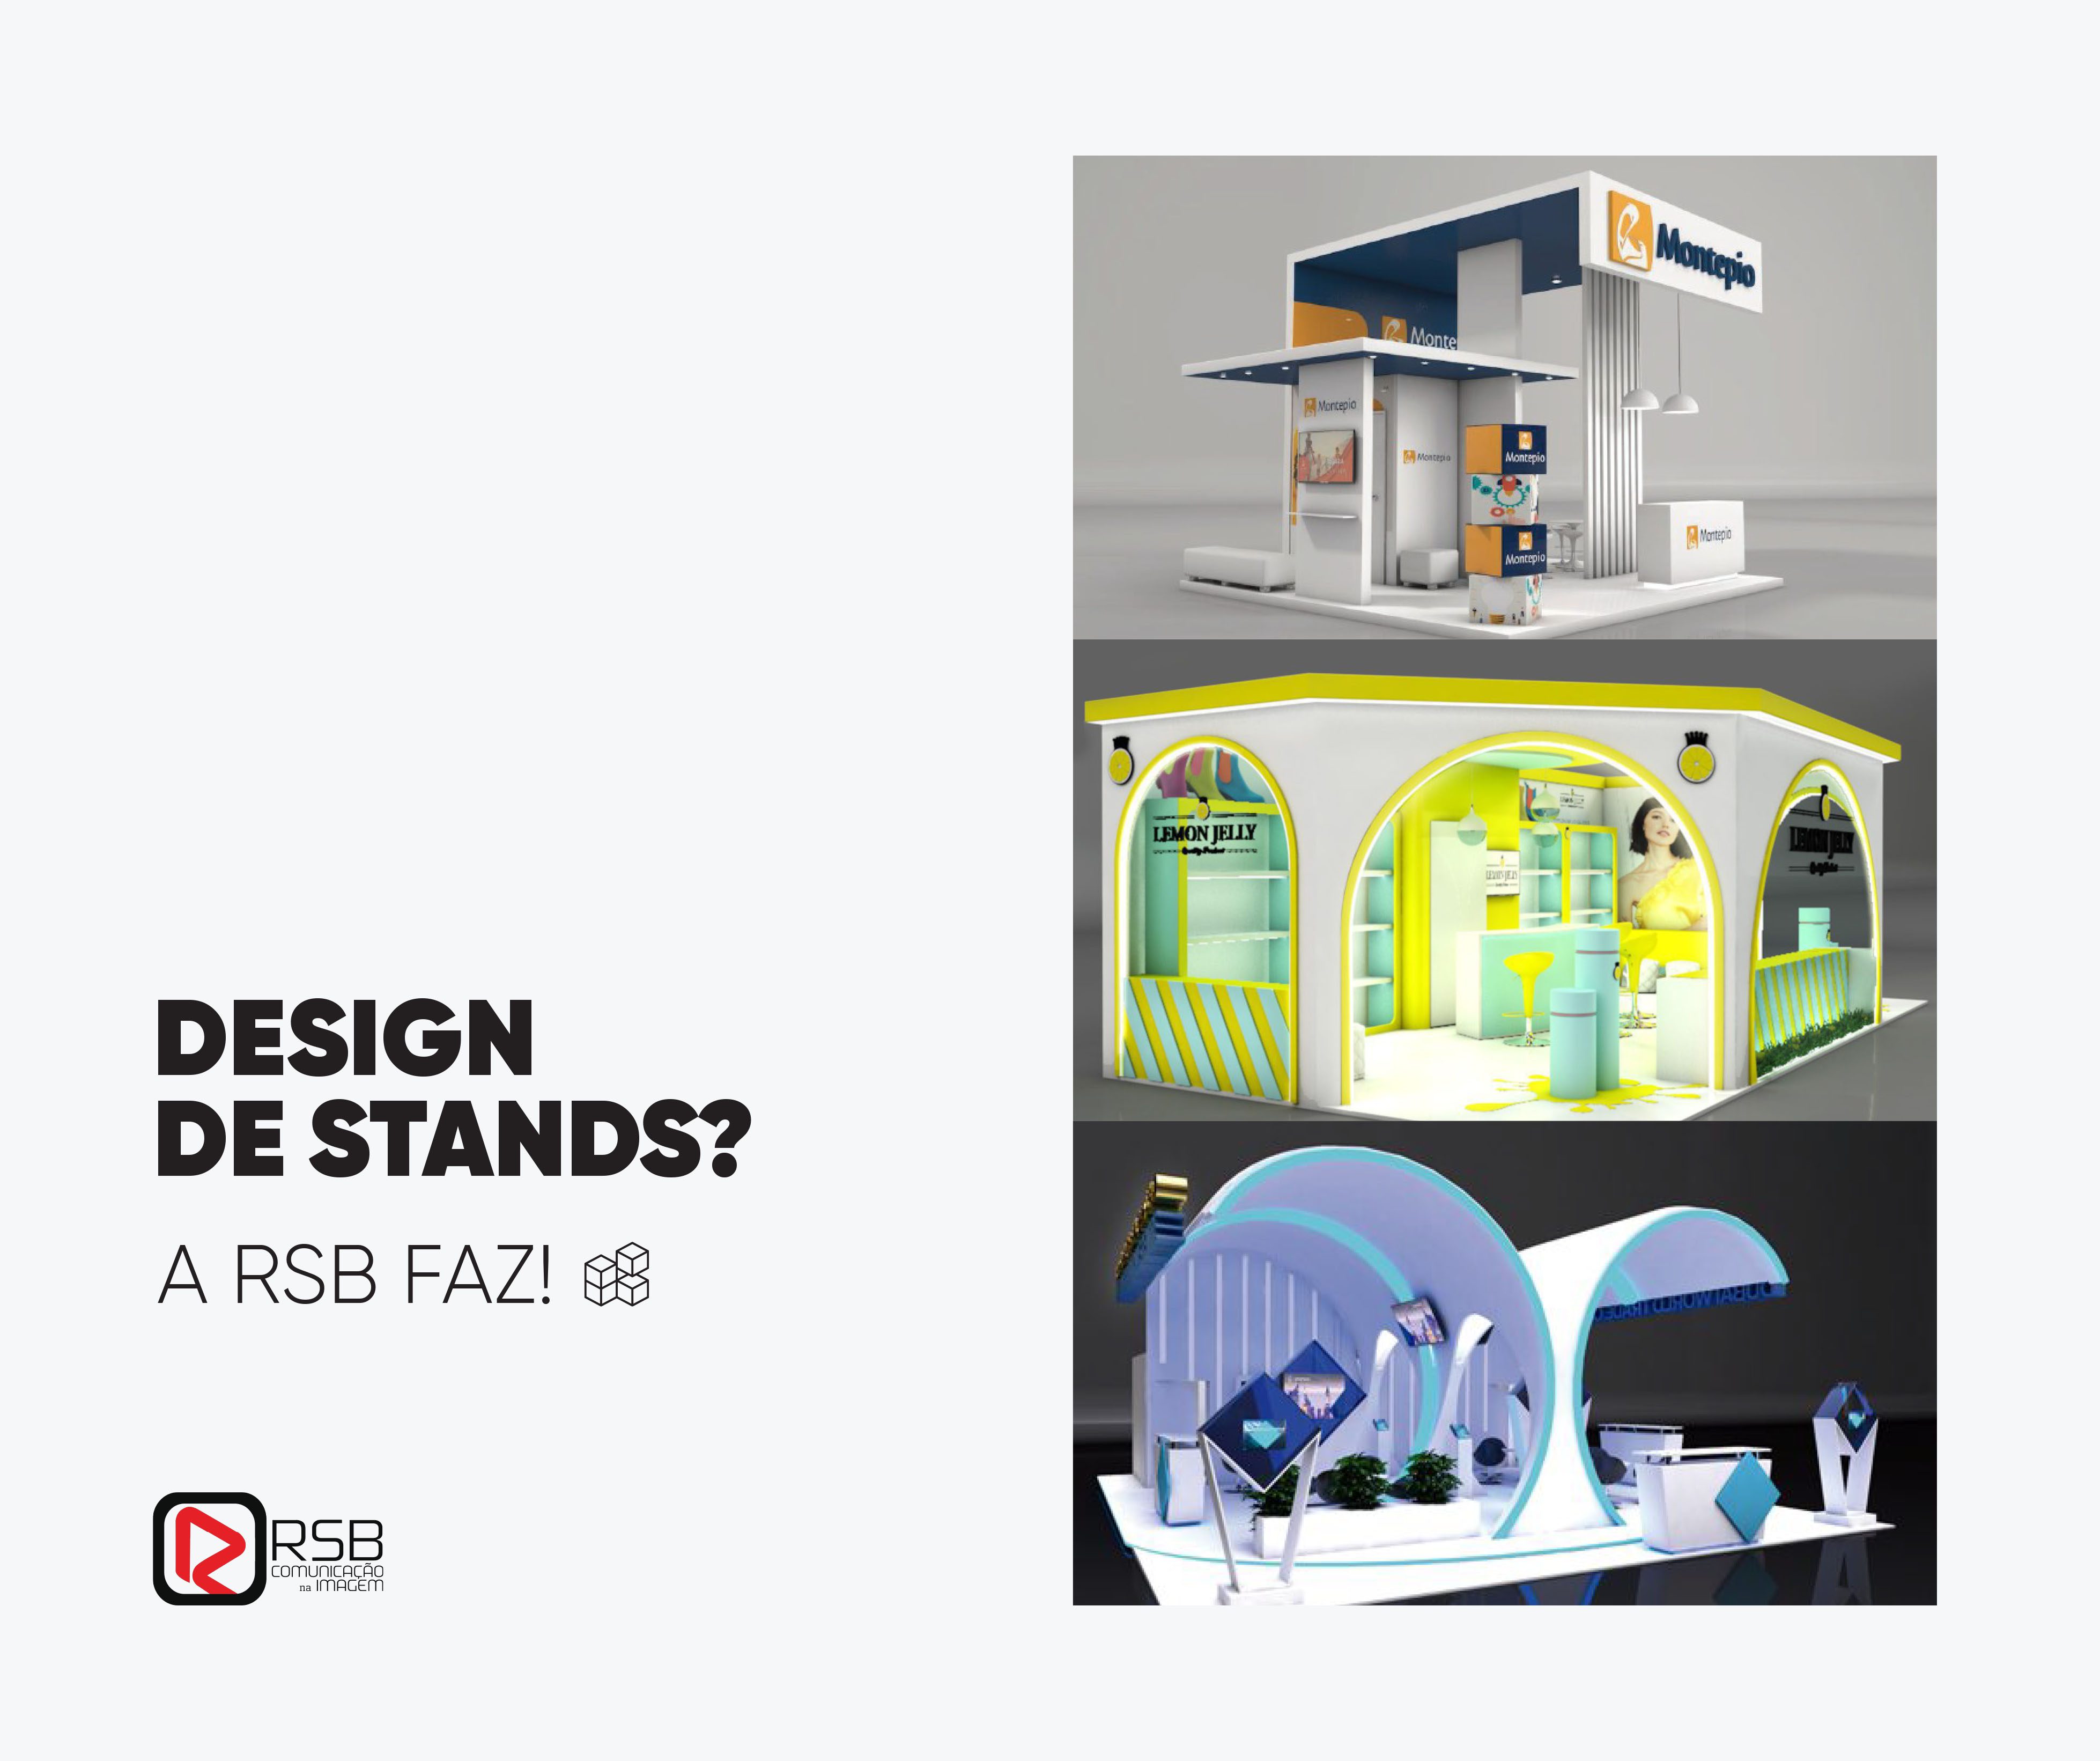 3D design of stands for fair shows